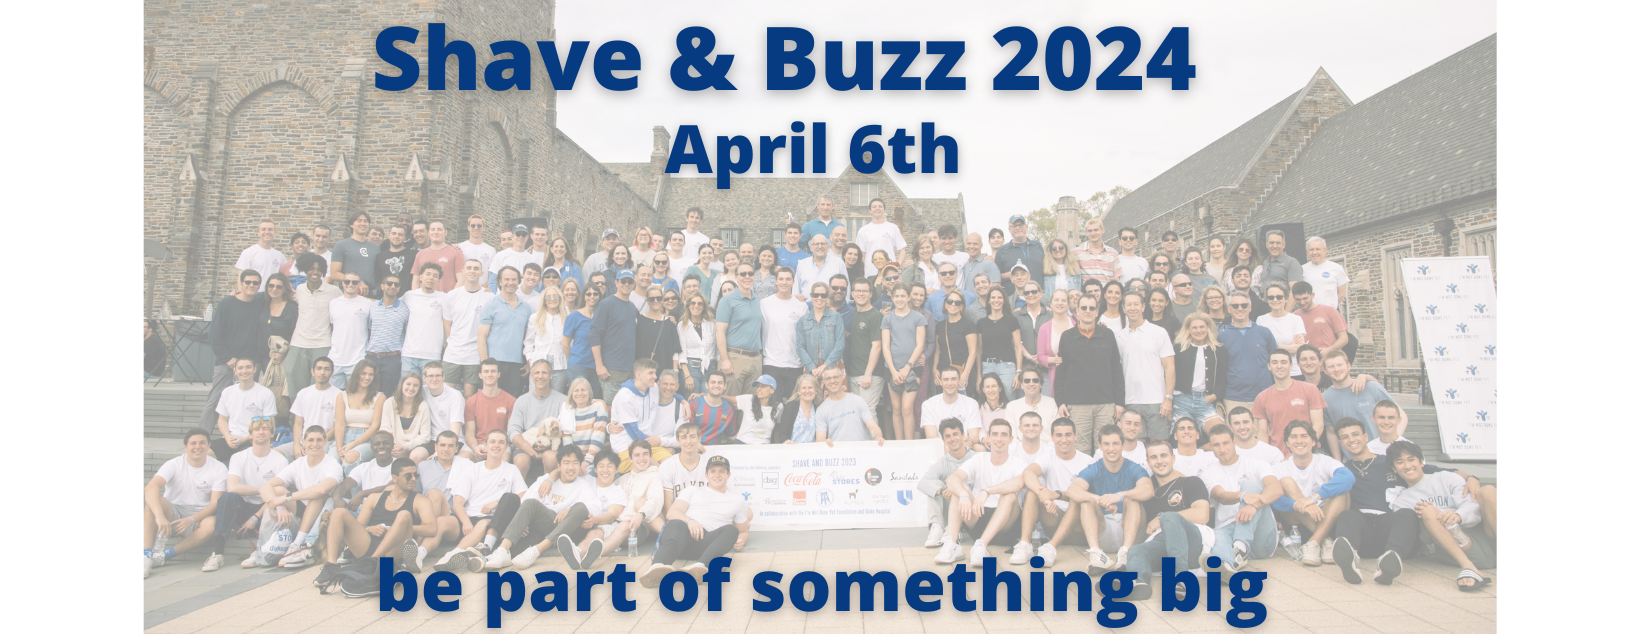 Shave & Buzz 2024